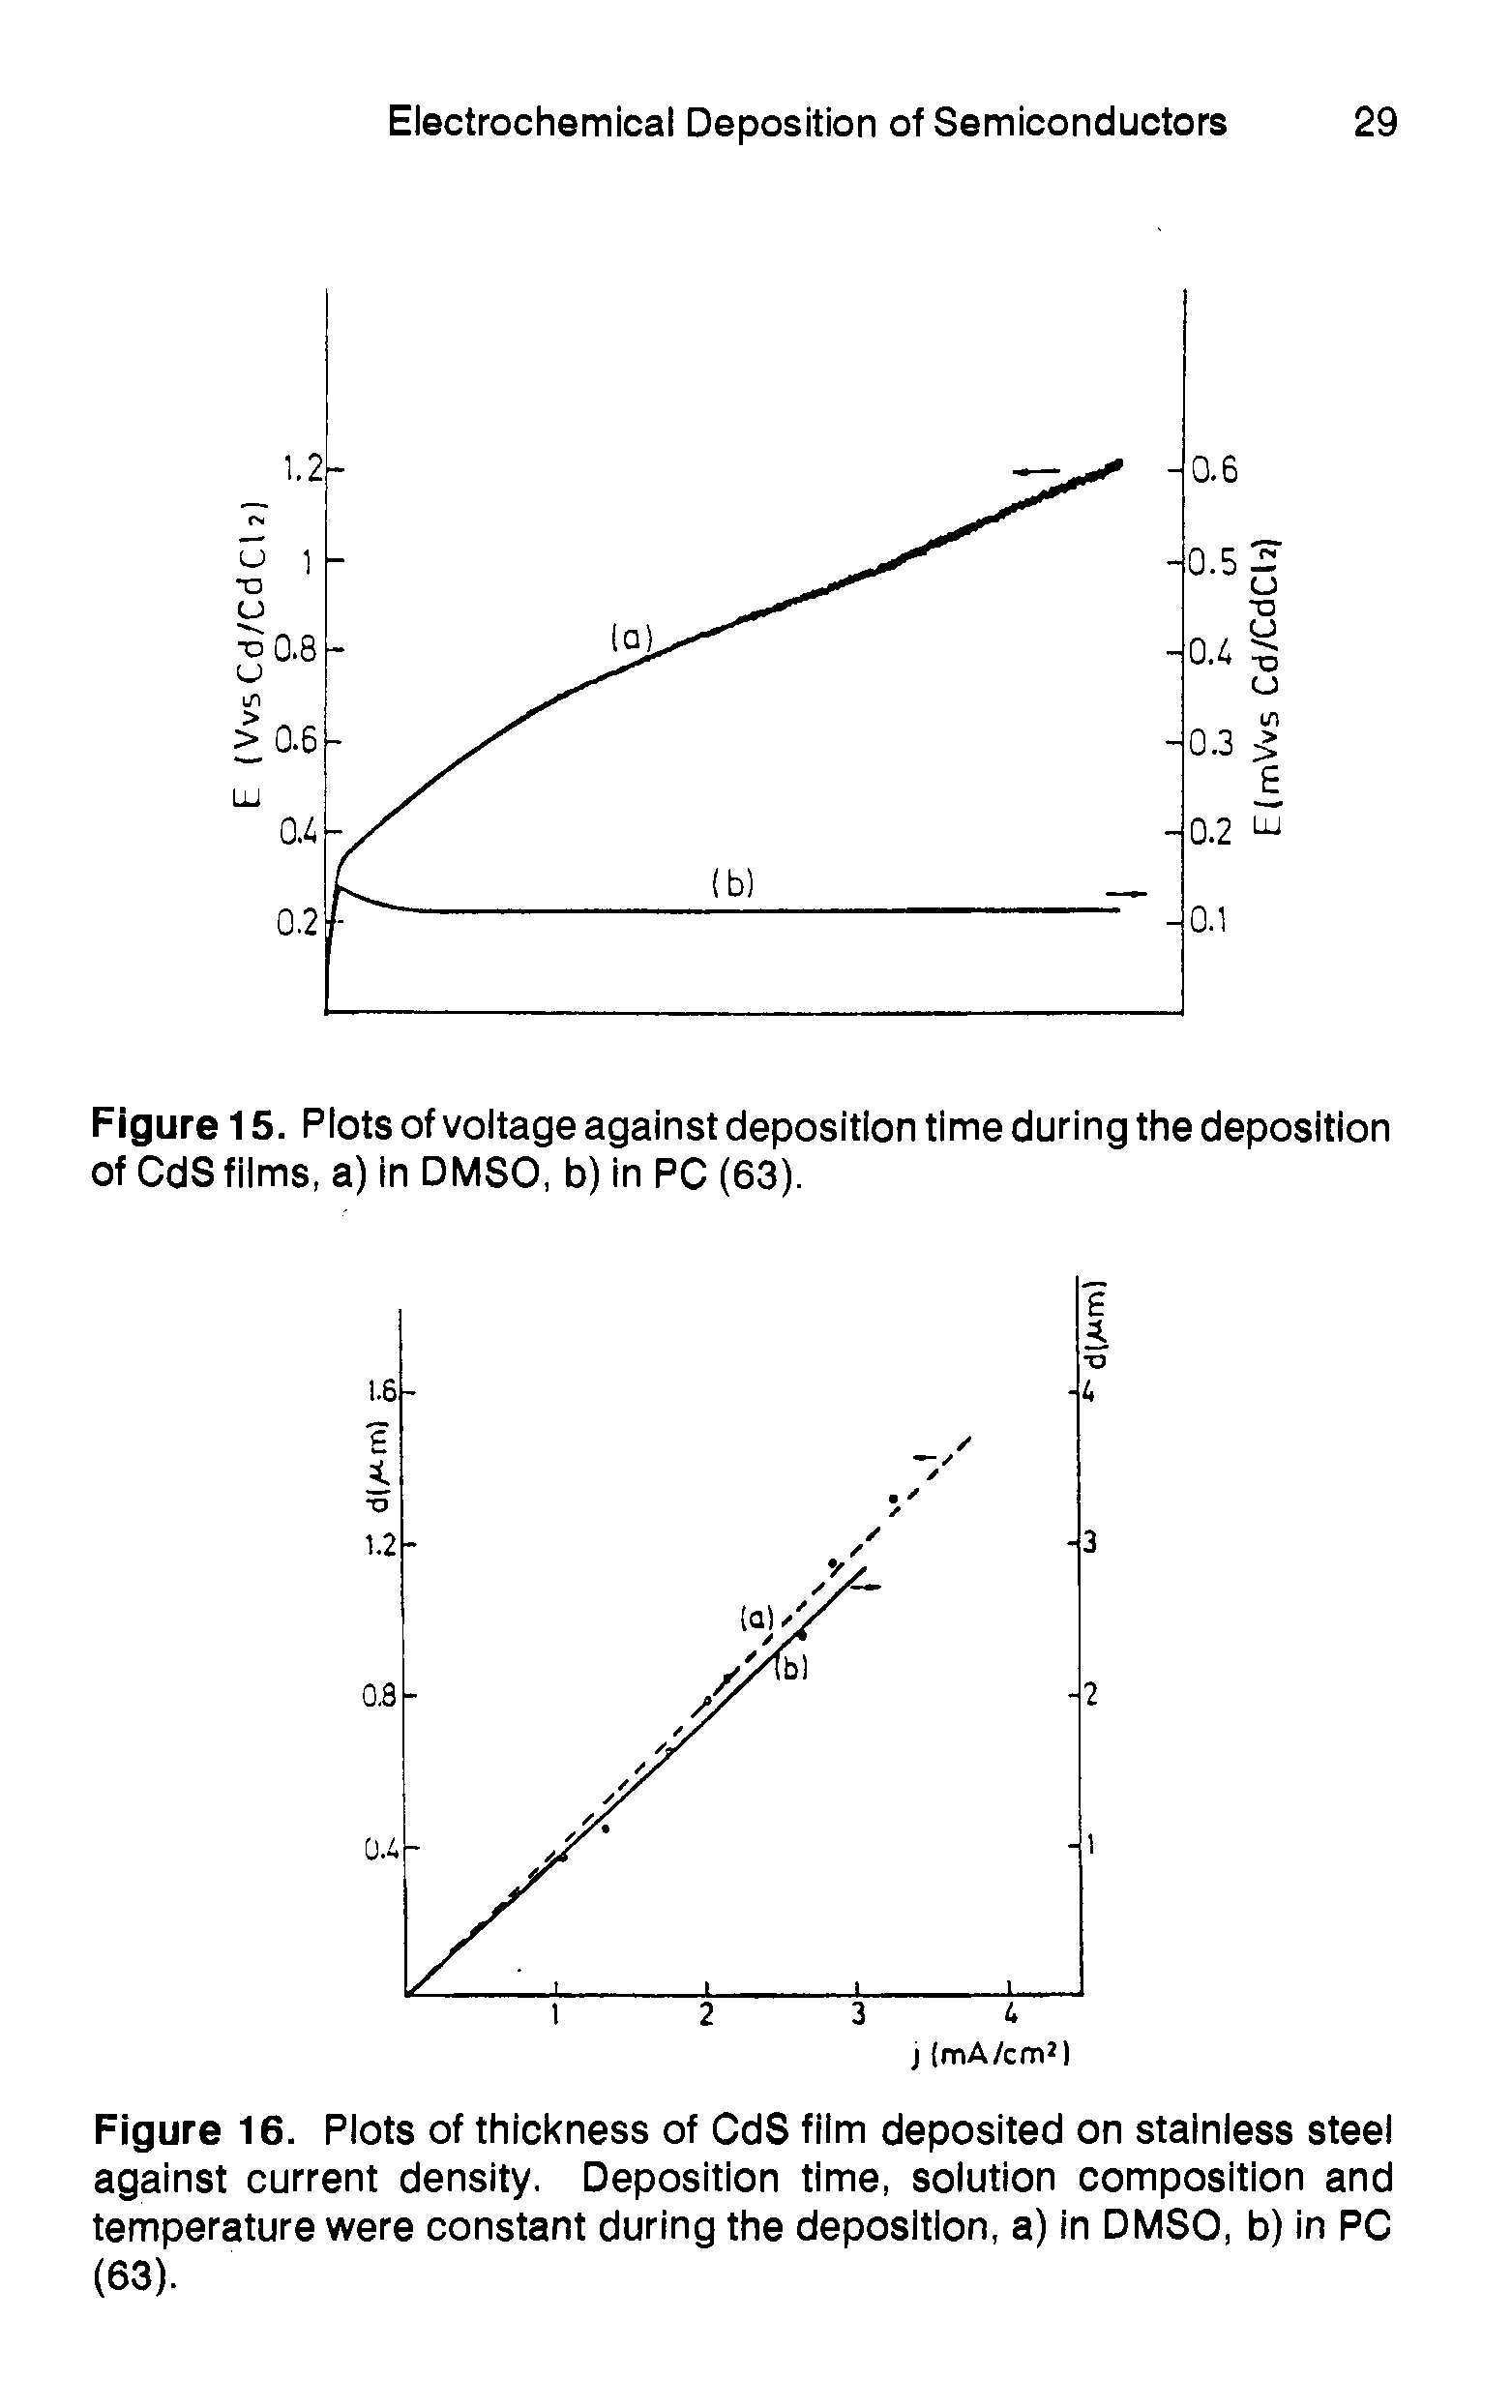 Figure 16. Plots of thickness of CdS film deposited on stainless steel against current density. Deposition time, solution composition and temperature were constant during the deposition, a) in DMSO, b) in PC (63).